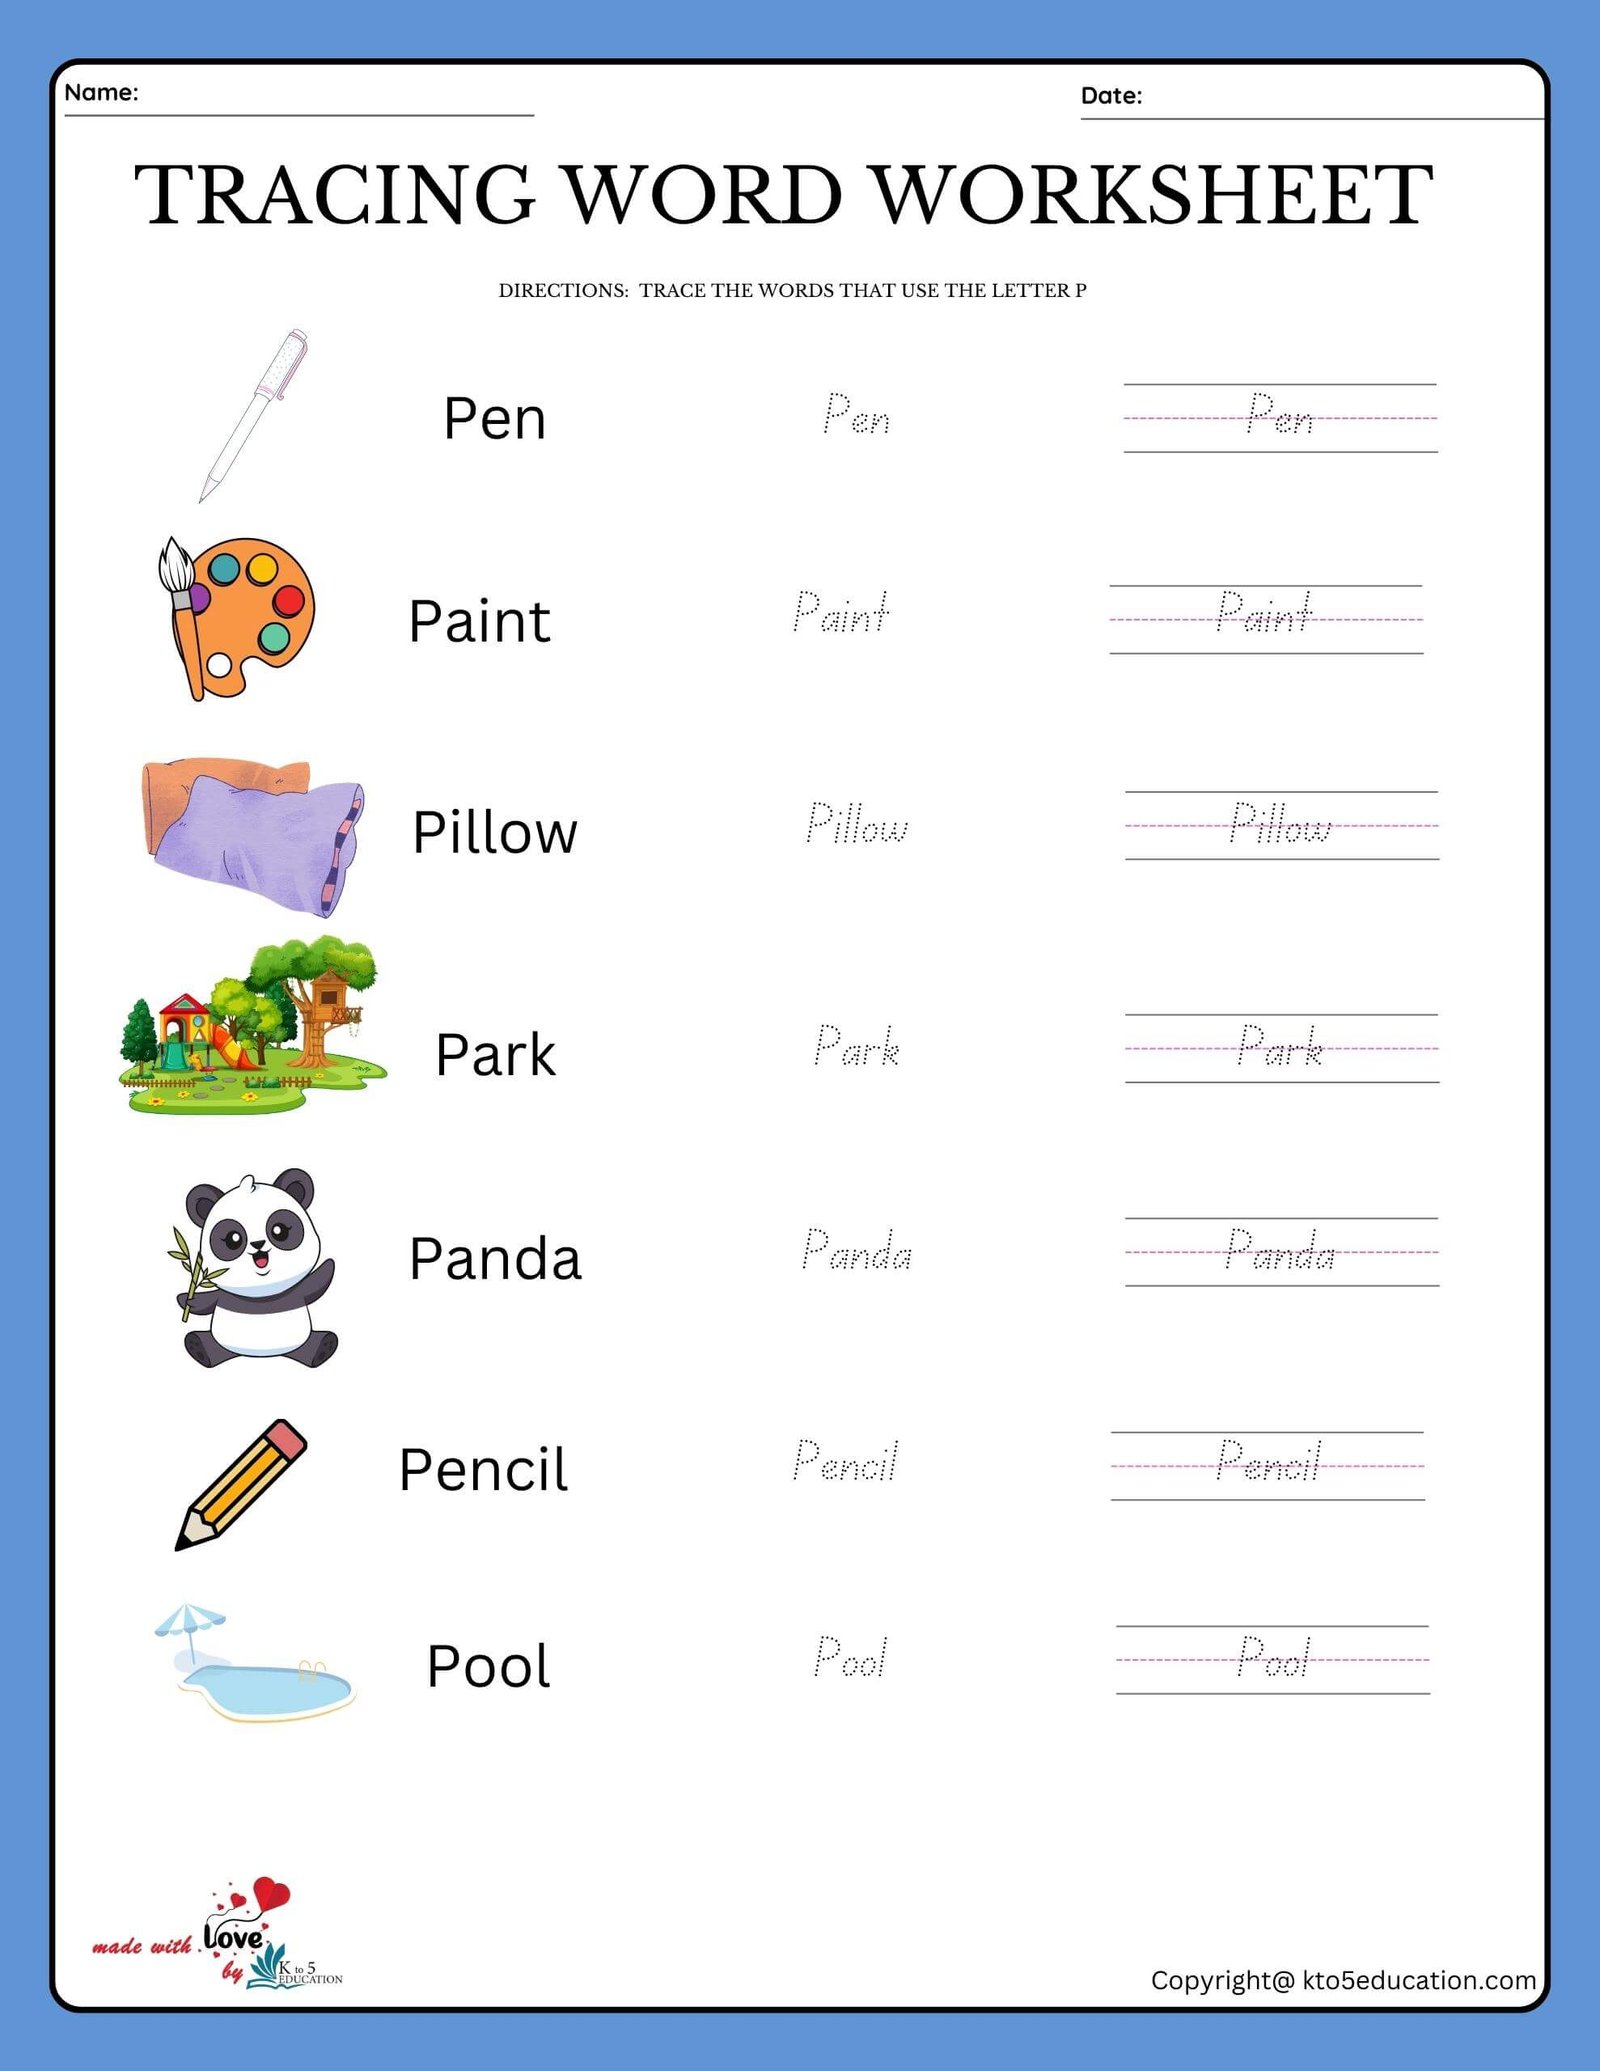 Trace The Words That Use The Letter P Worksheet